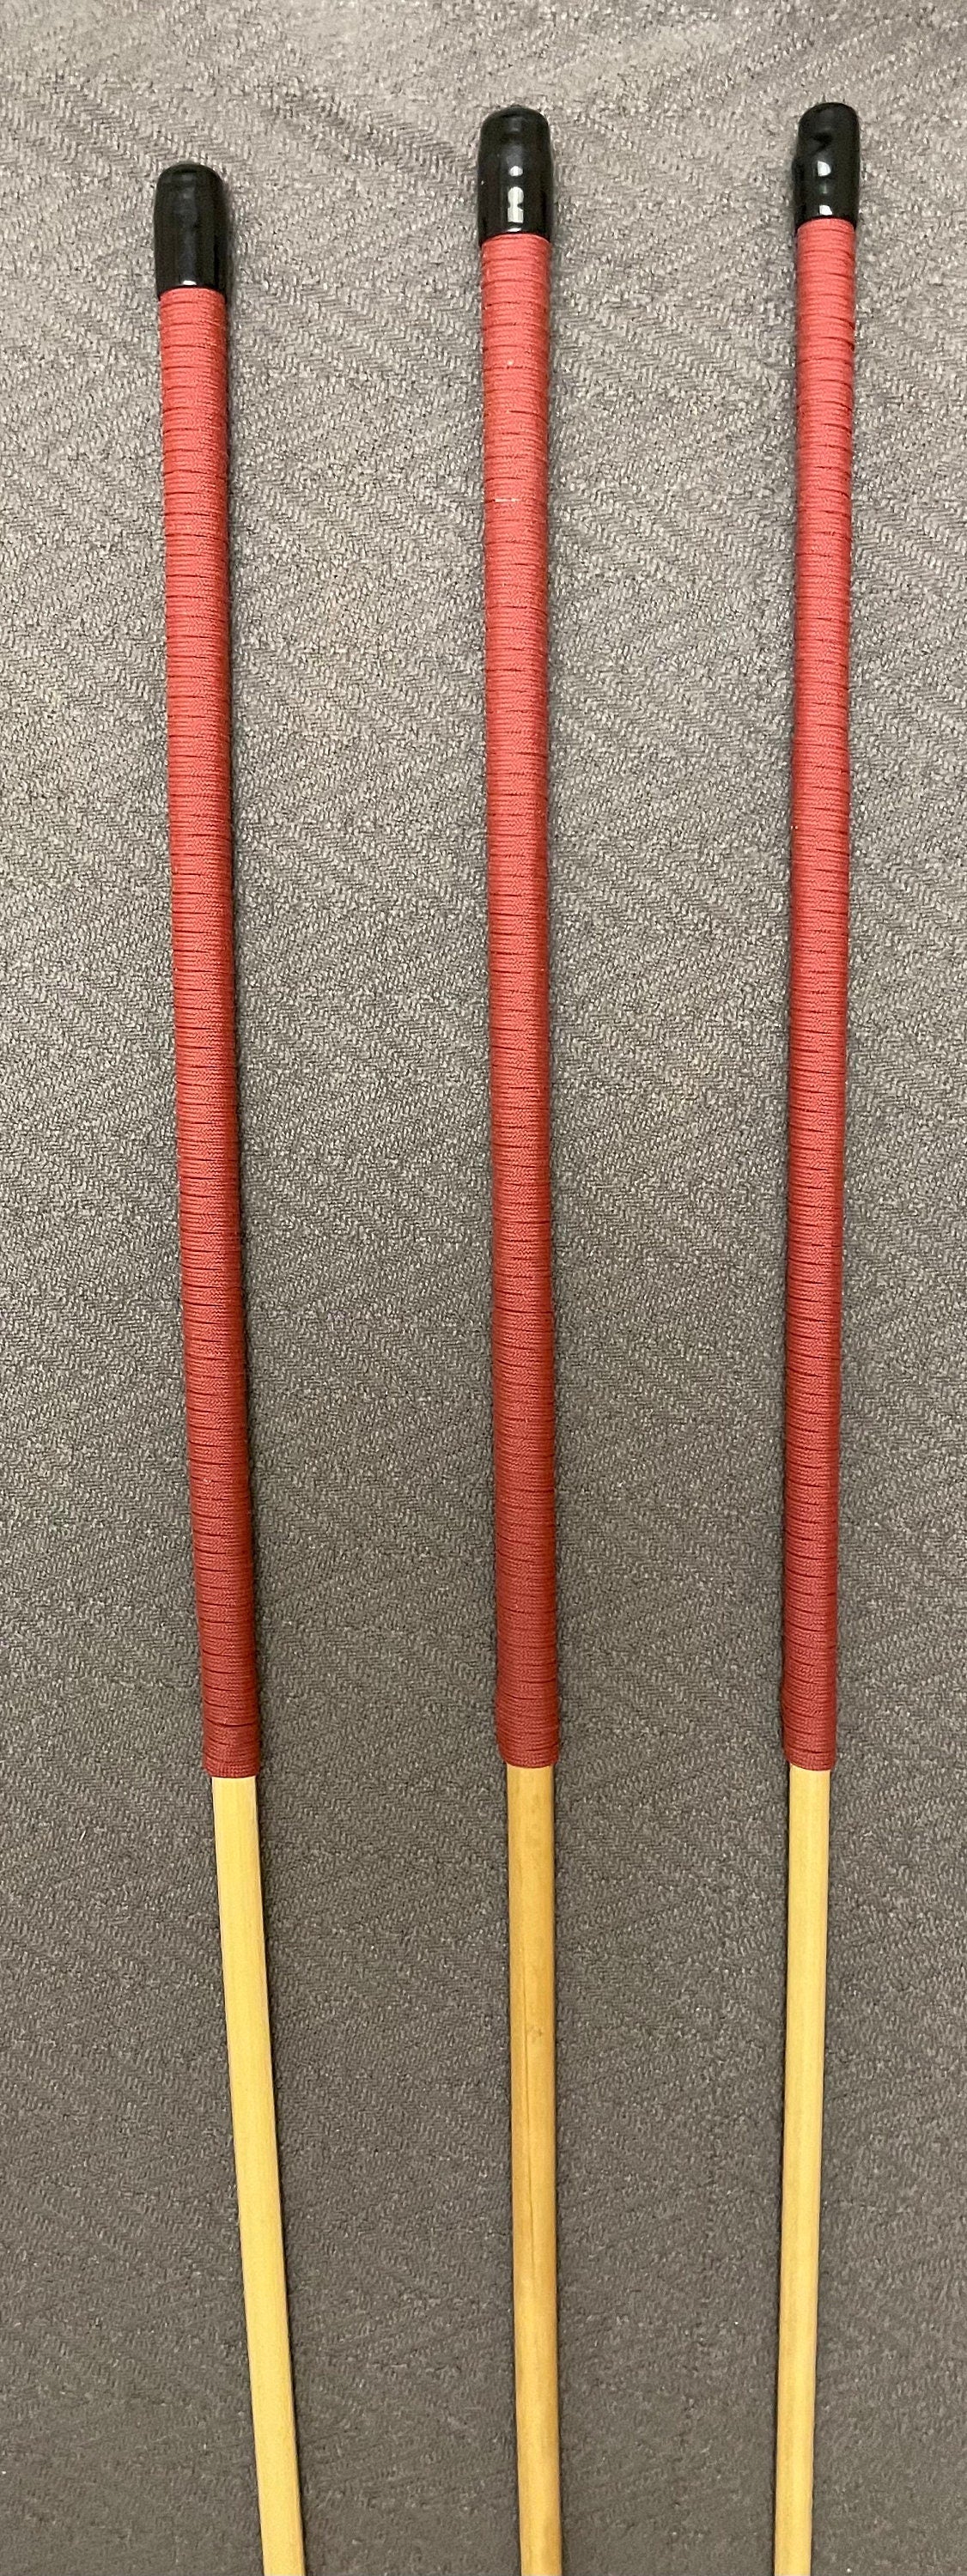  Miss Stripewell's English Discipline Trio Classic Dragon Canes / Punishment Canes / BDSM Canes Set of 3  - 102 to 105 cms L - Red Handles - Englishvice Canes